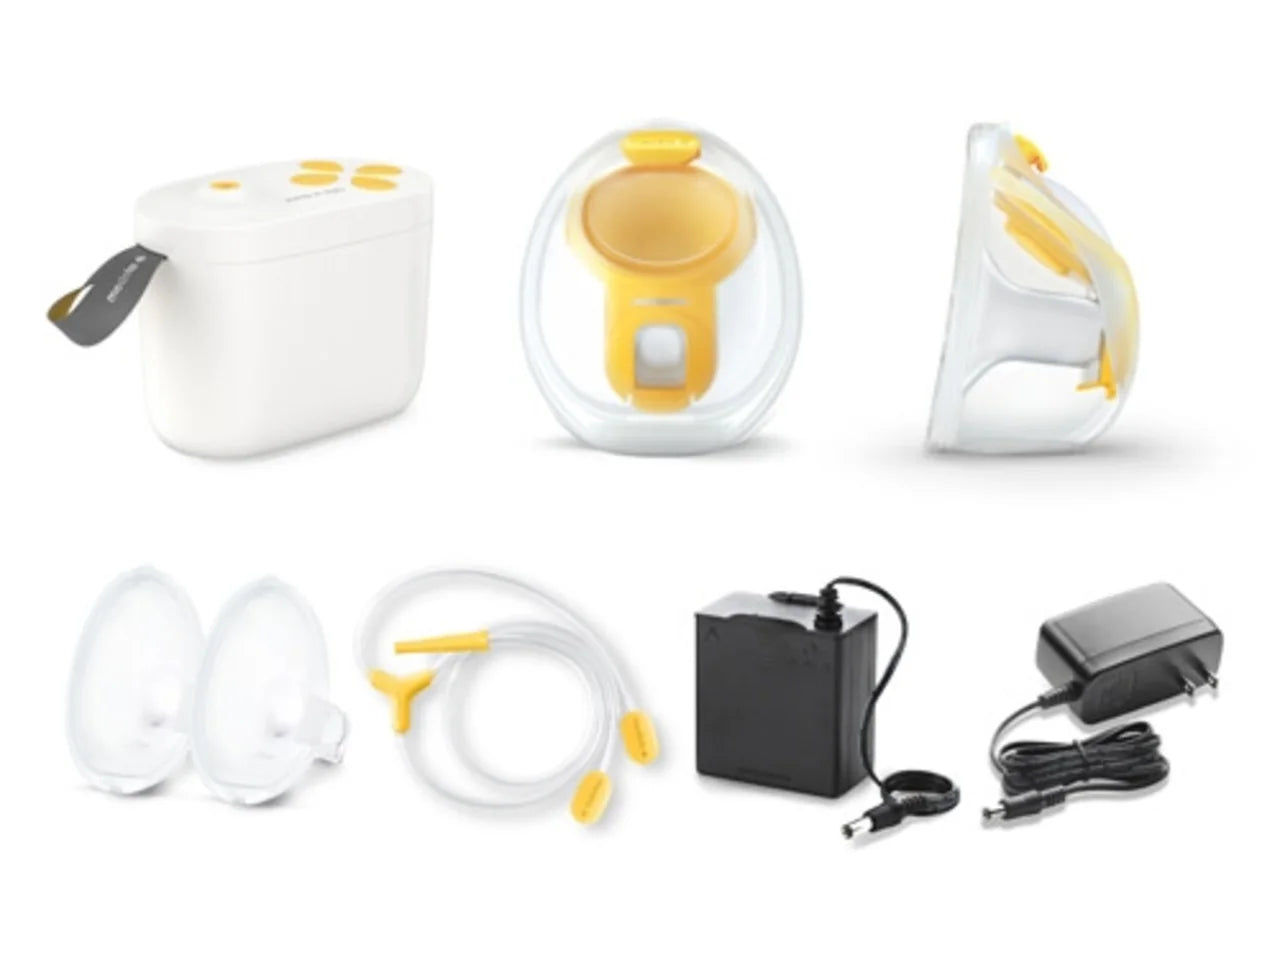 New Medela Pump In Style Max Flow Hands-free Double Electric Breast Pump